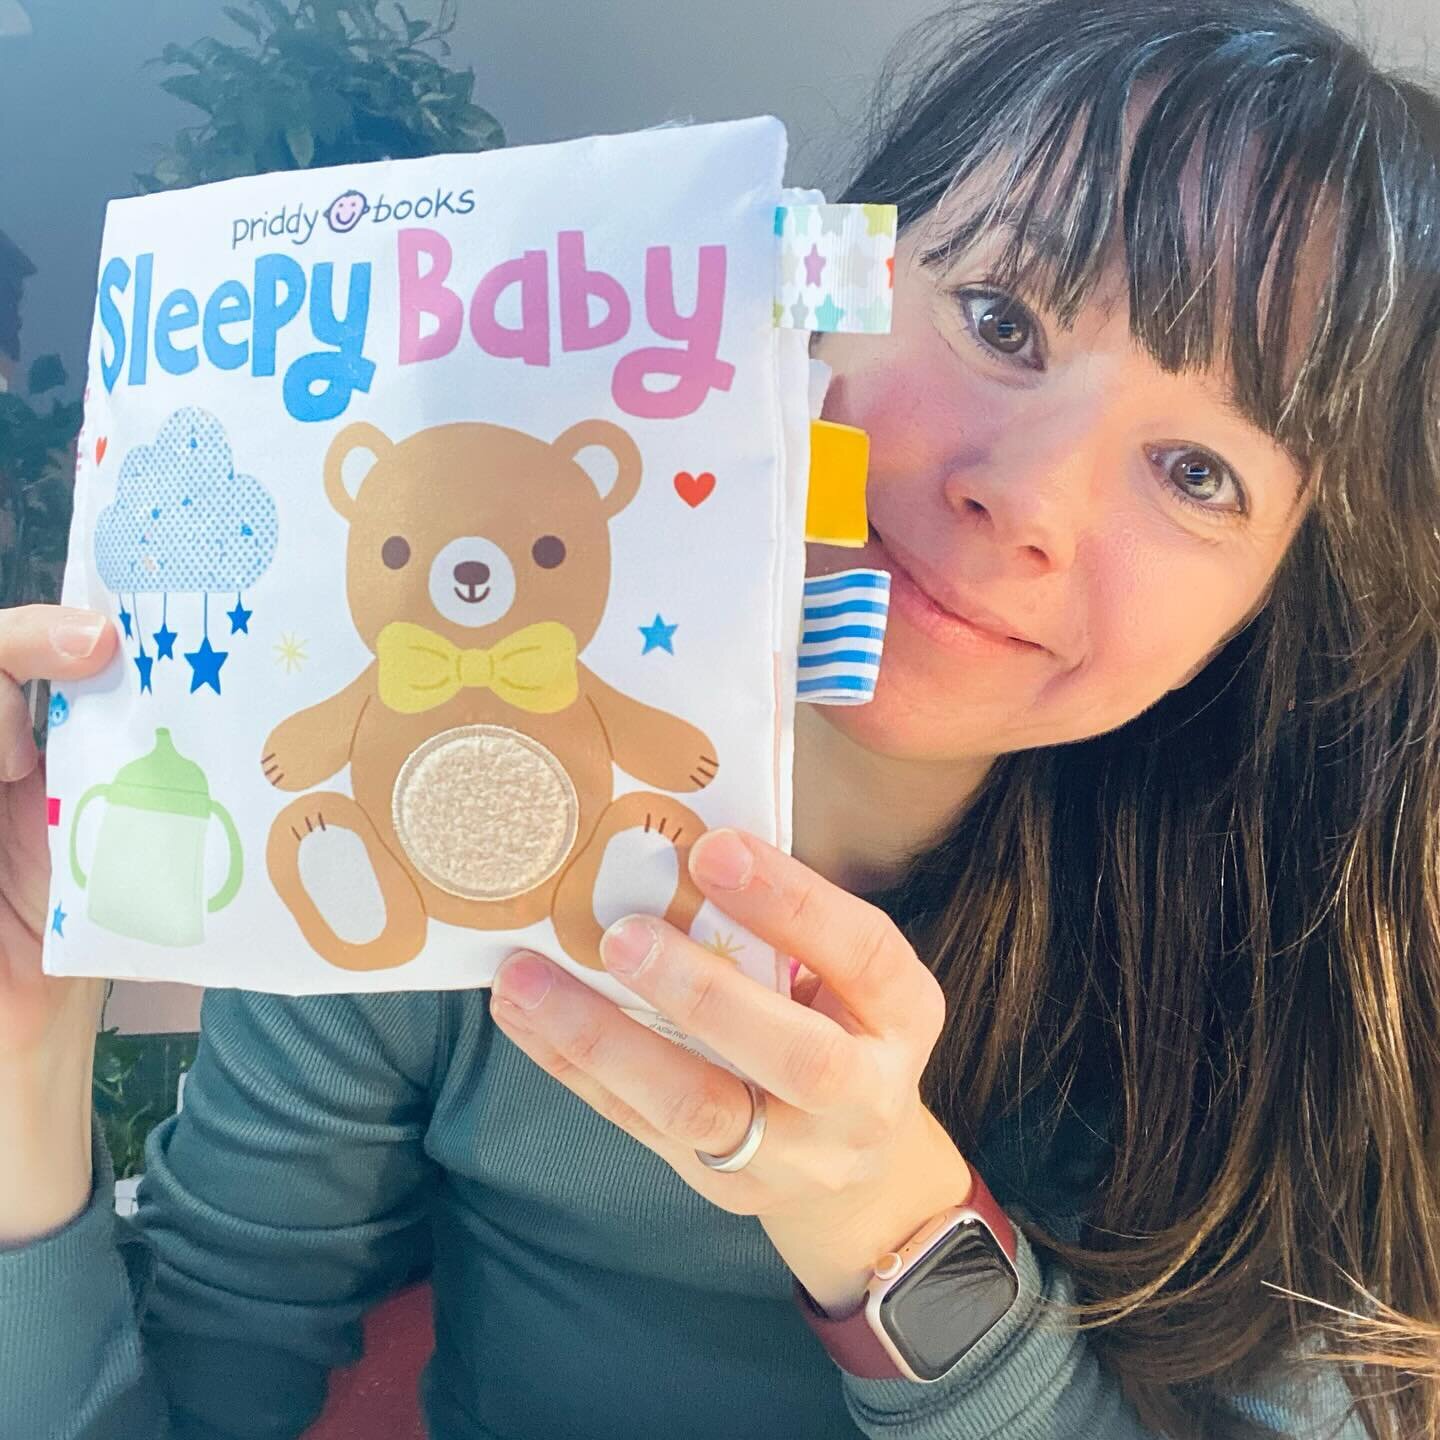 Look what arrived at my doorsteps! Showing my face to share my latest and first soft baby board book! 

Scroll to hear the satisfying sounds the crinkly pages make! 

What a joy to illustrate &lsquo;Sleepy Baby&rsquo; - published by @priddybooks 

Av